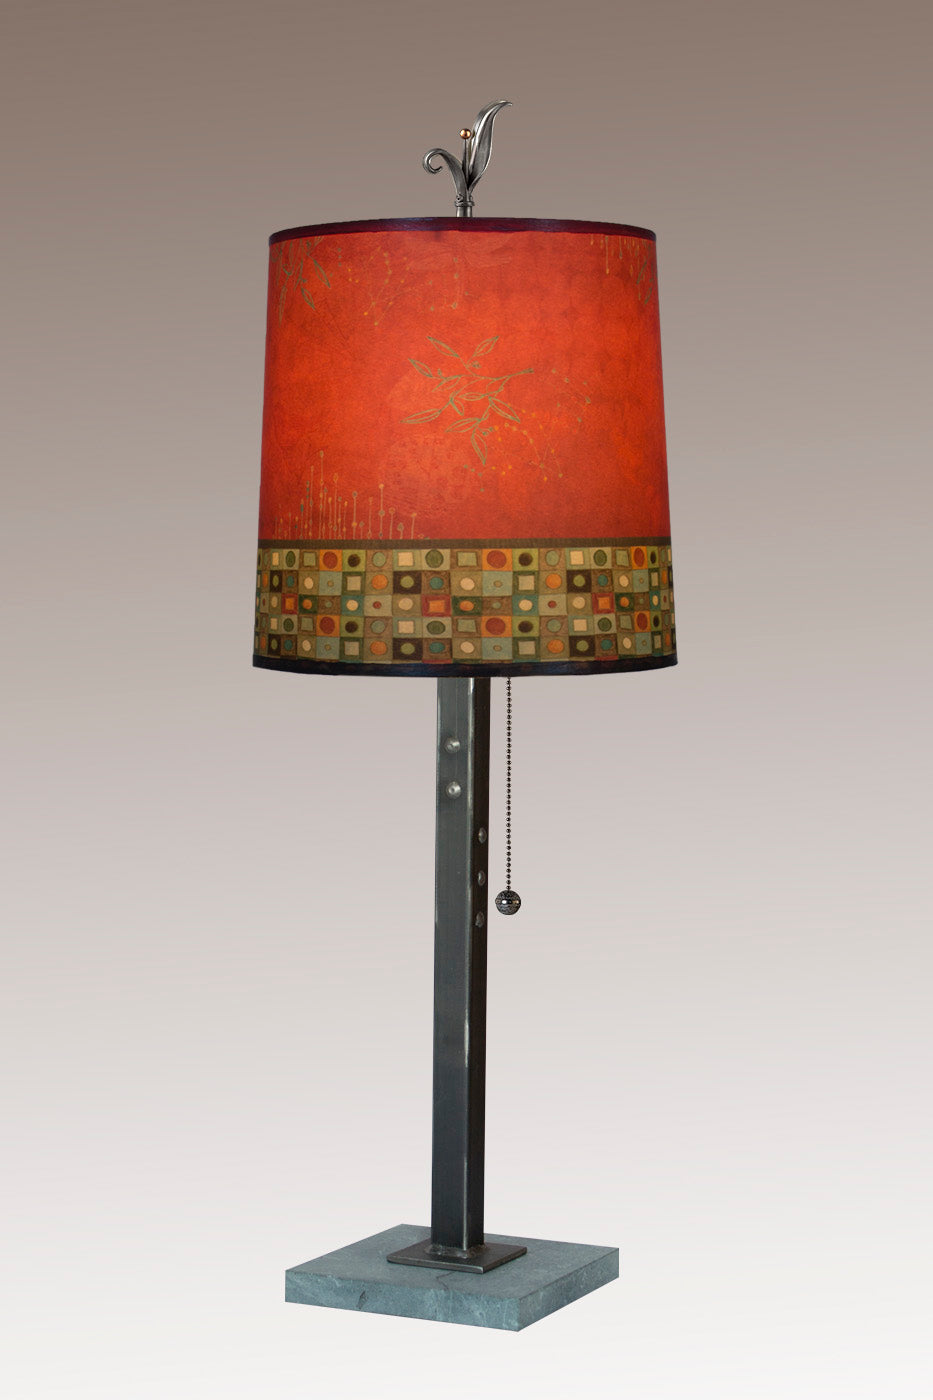 Janna Ugone & Co Table Lamps Steel Table Lamp with Medium Drum Shade in Red Mosaic